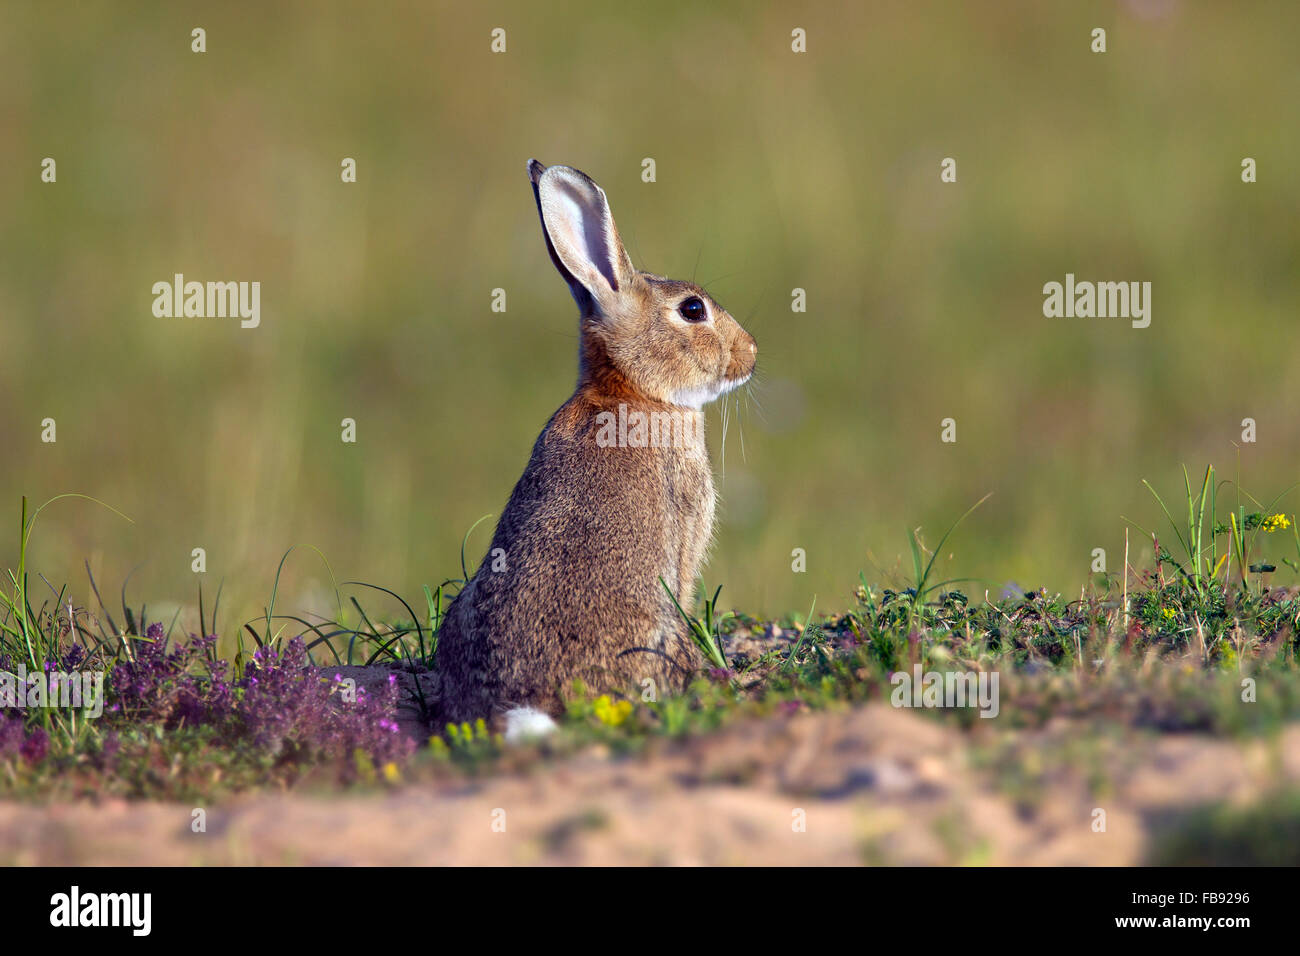 Young European rabbit / common rabbit (Oryctolagus cuniculus) sitting in meadow Stock Photo